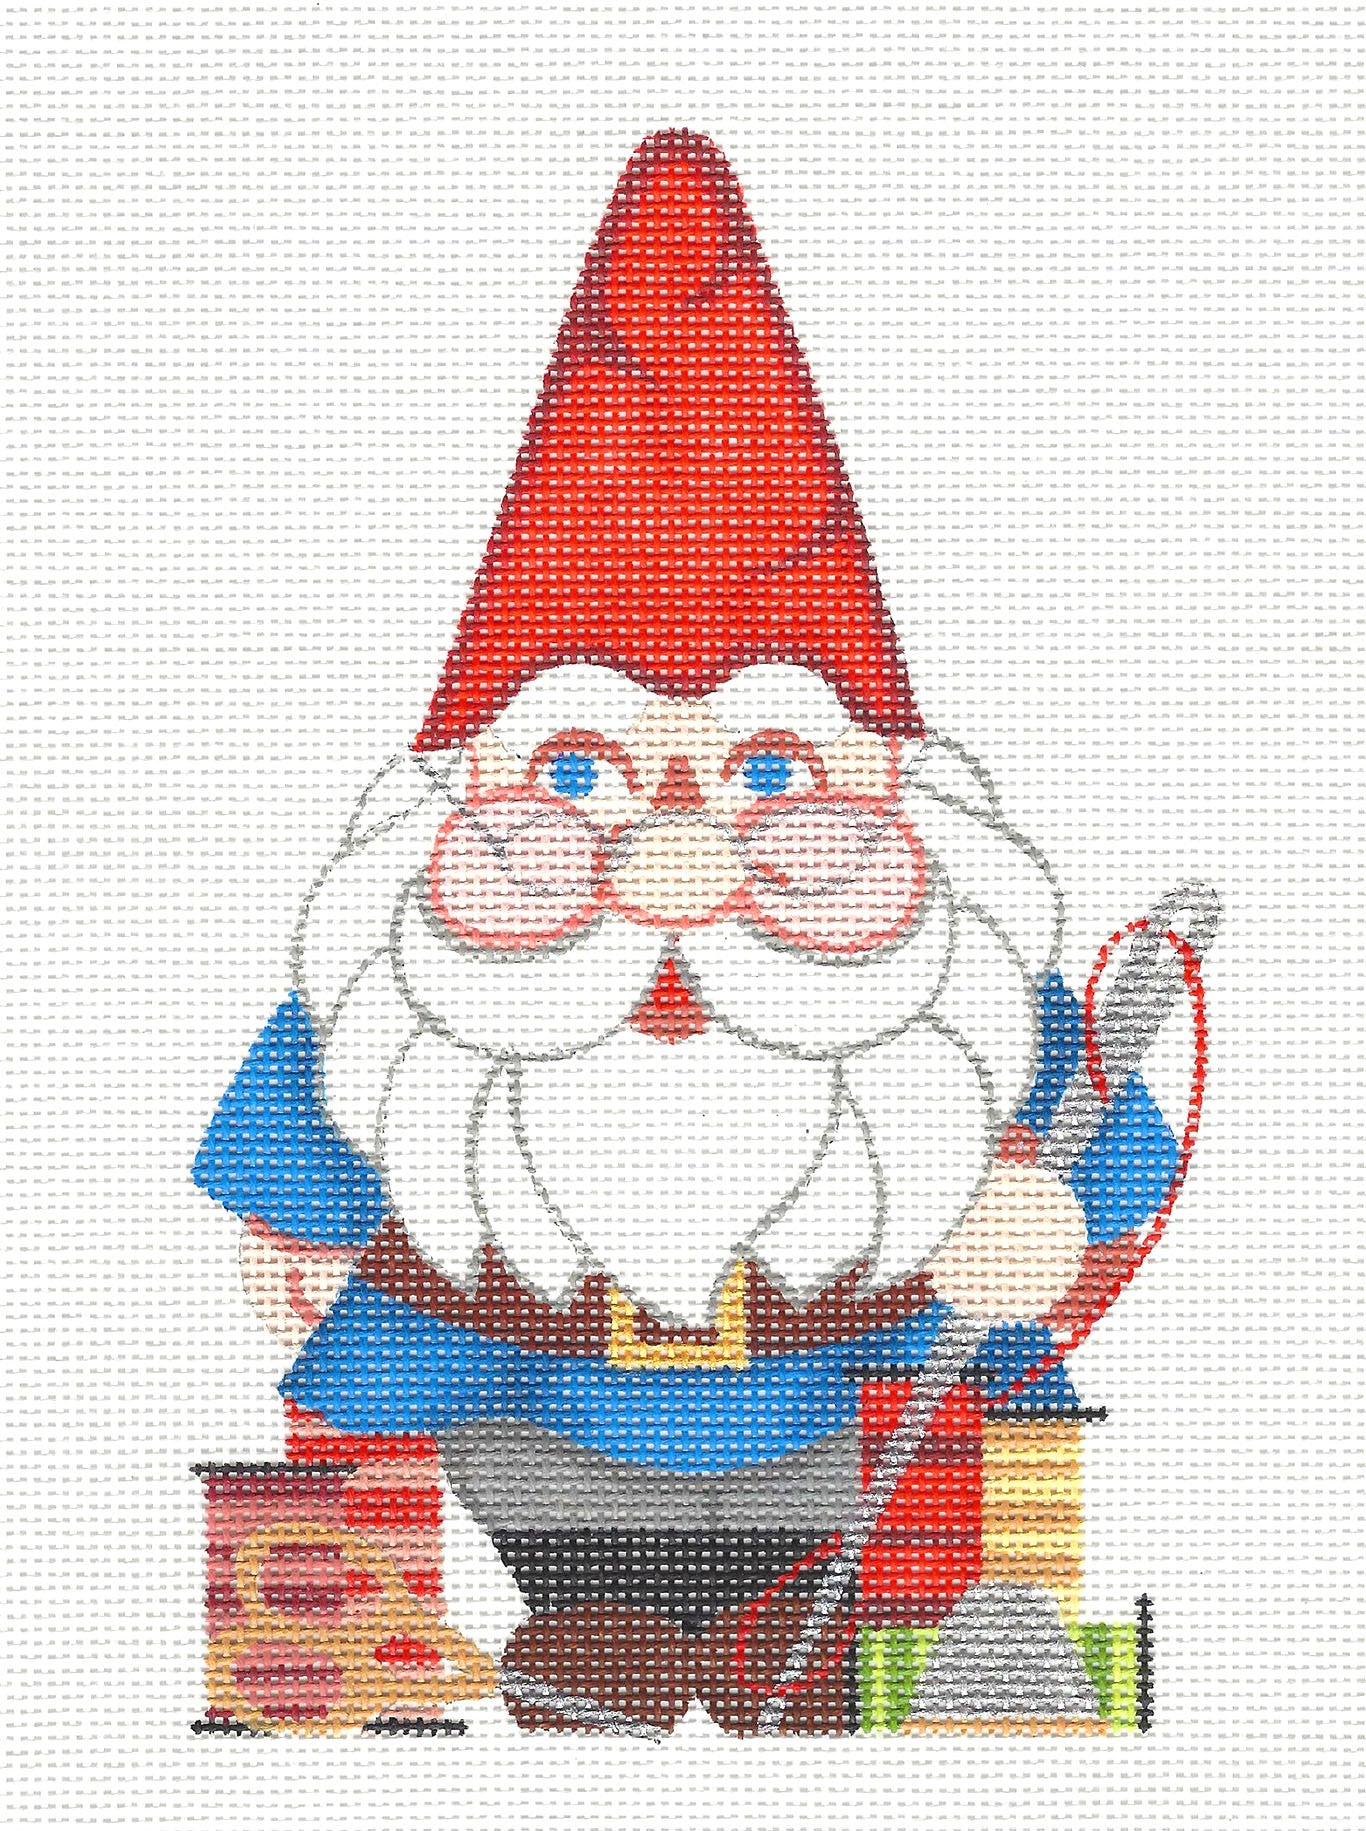 Gnome Canvas ~ Stitching Gnome with Tools handpainted Needlepoint Canvas by Raymond Crawford